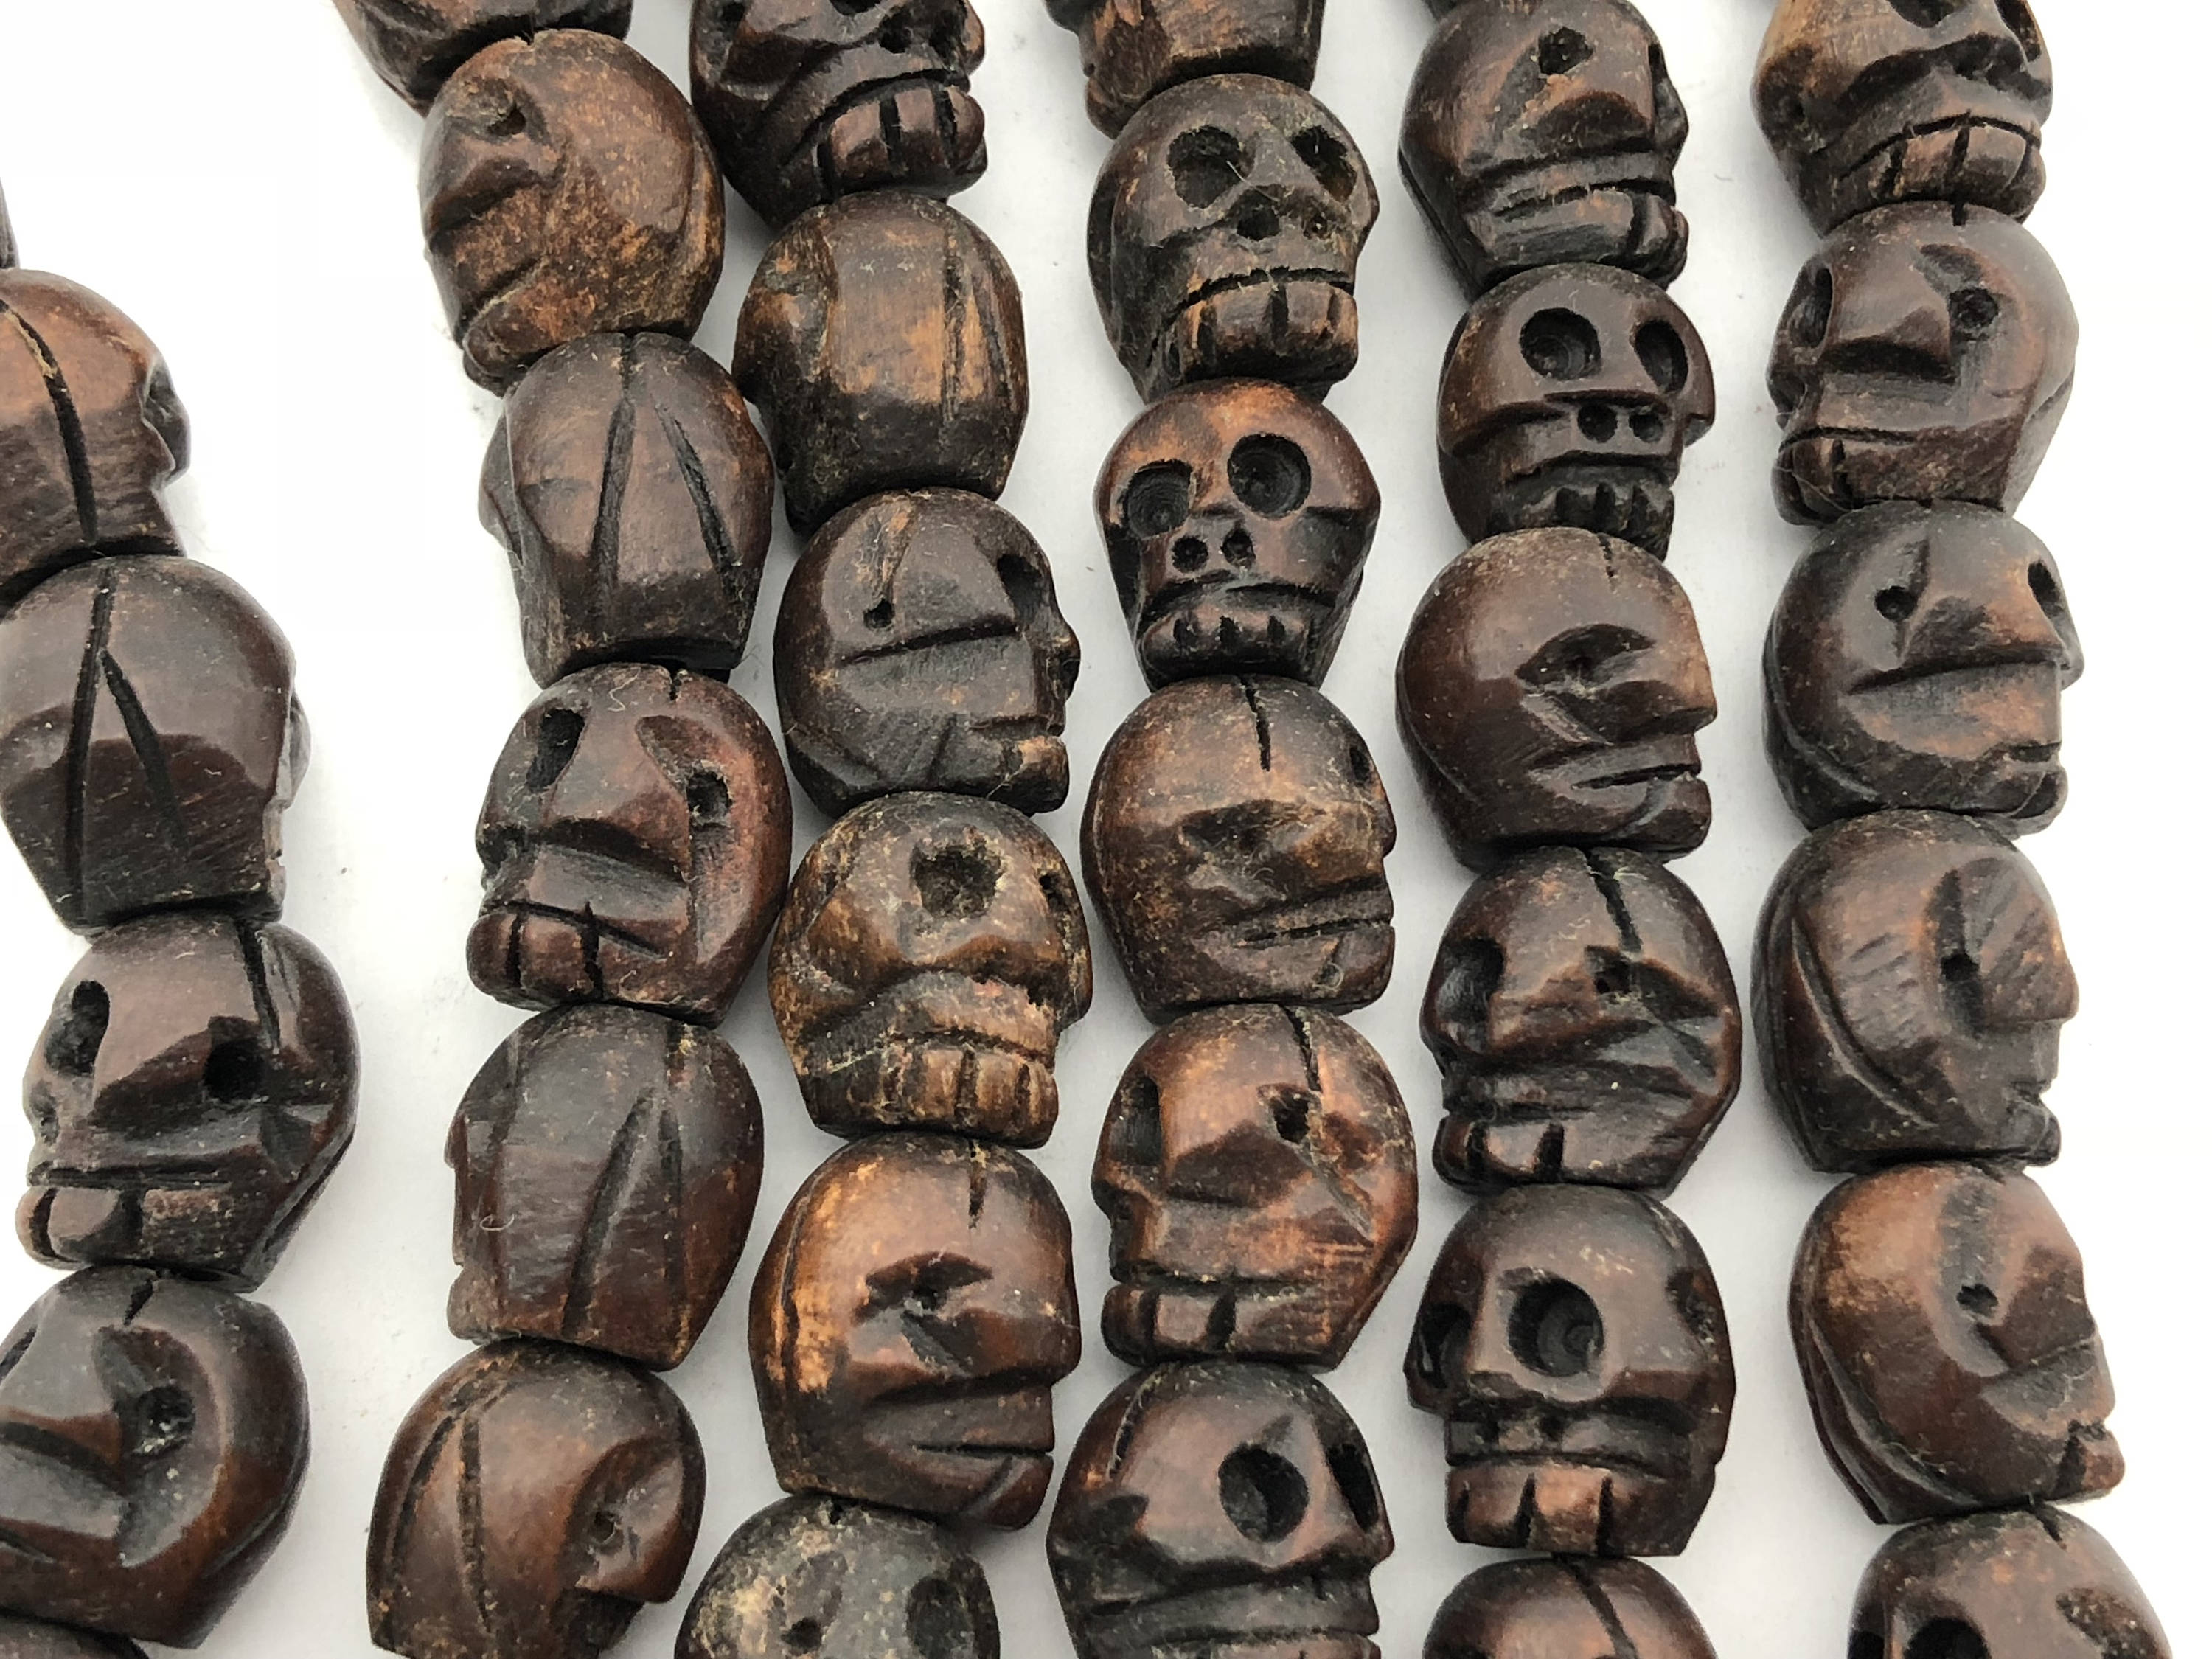 Wood 12mm x 13mm Carved Skull Beads (108)